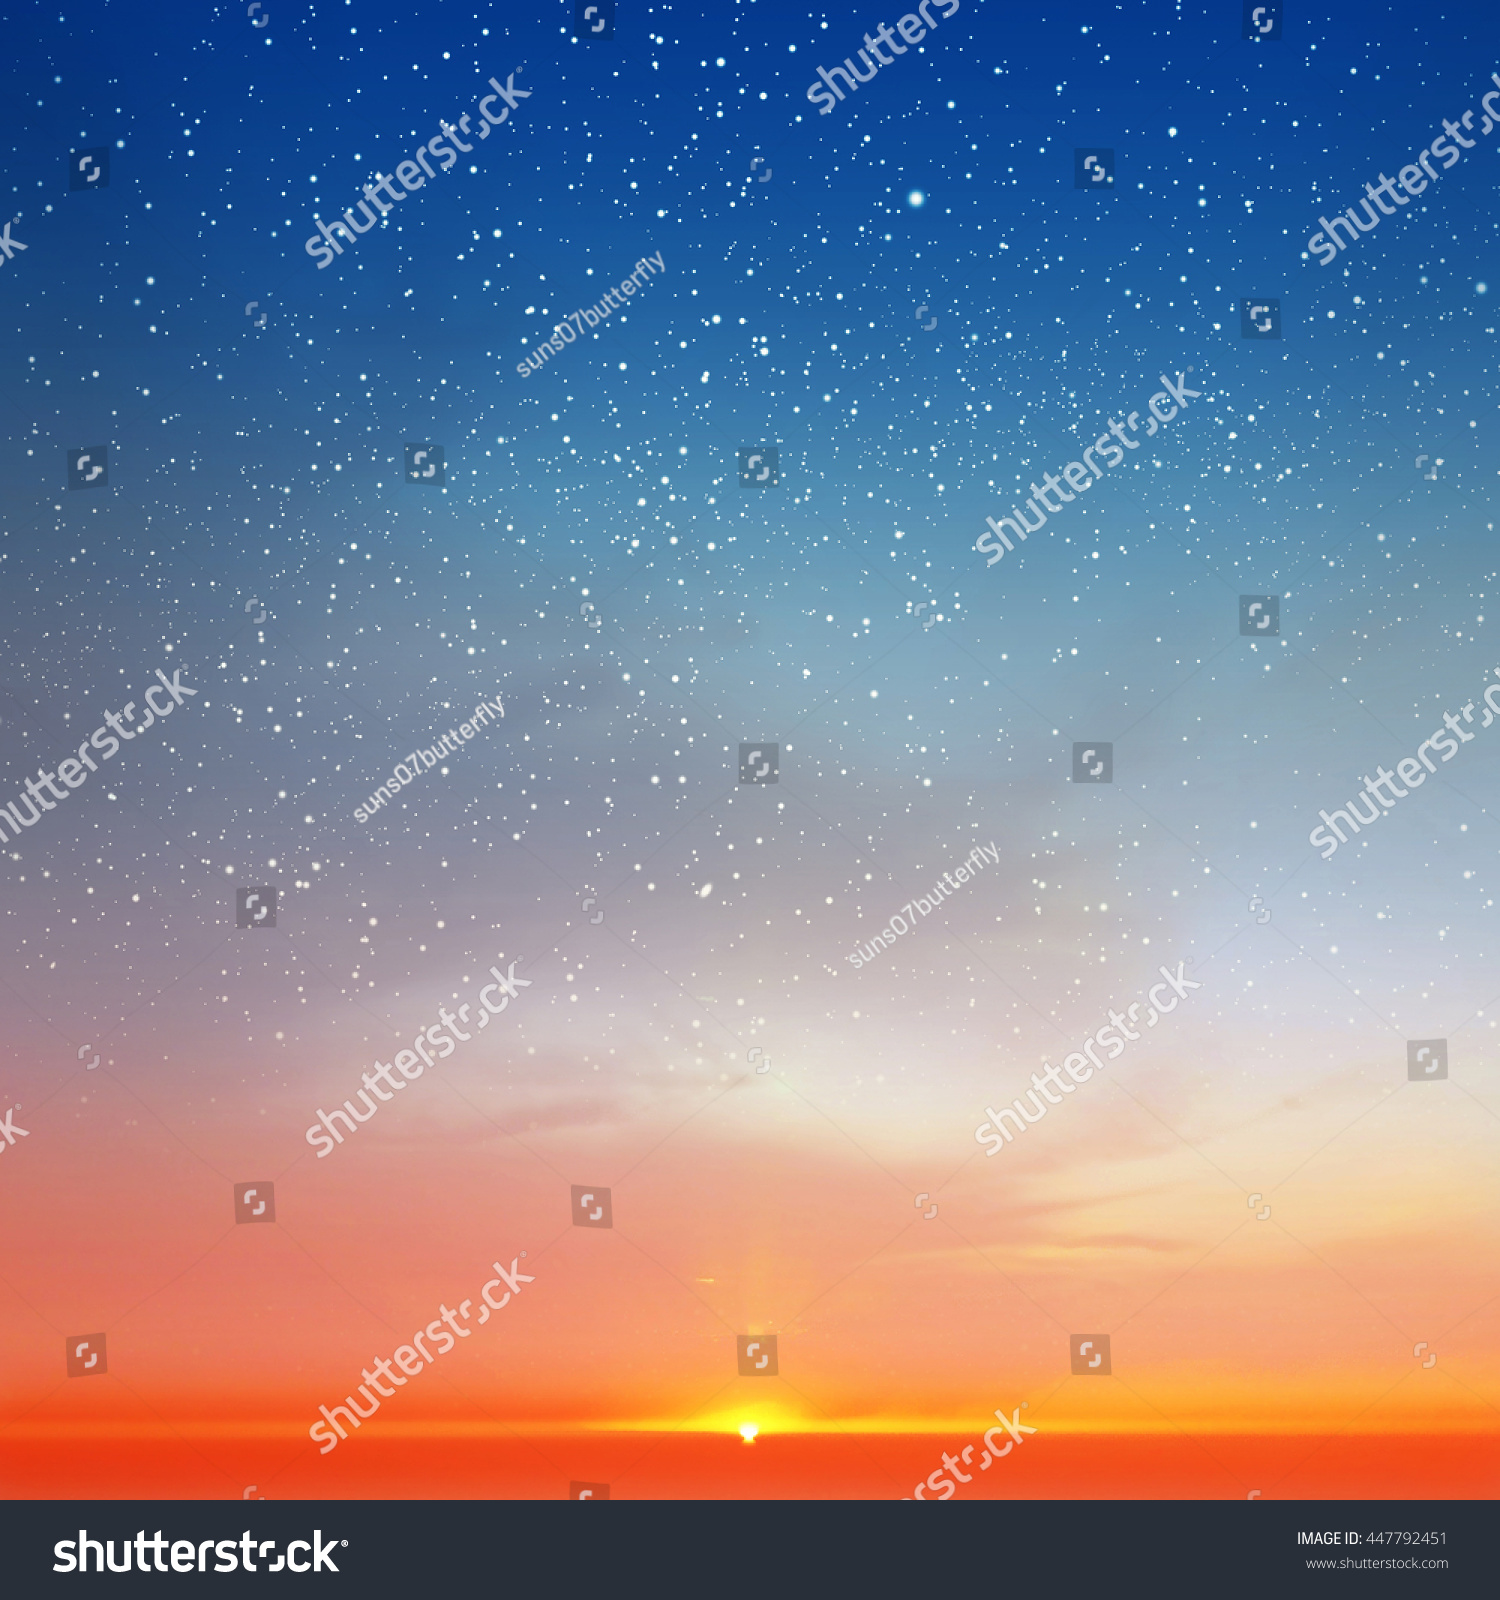 Magic sky background with stars #447792451